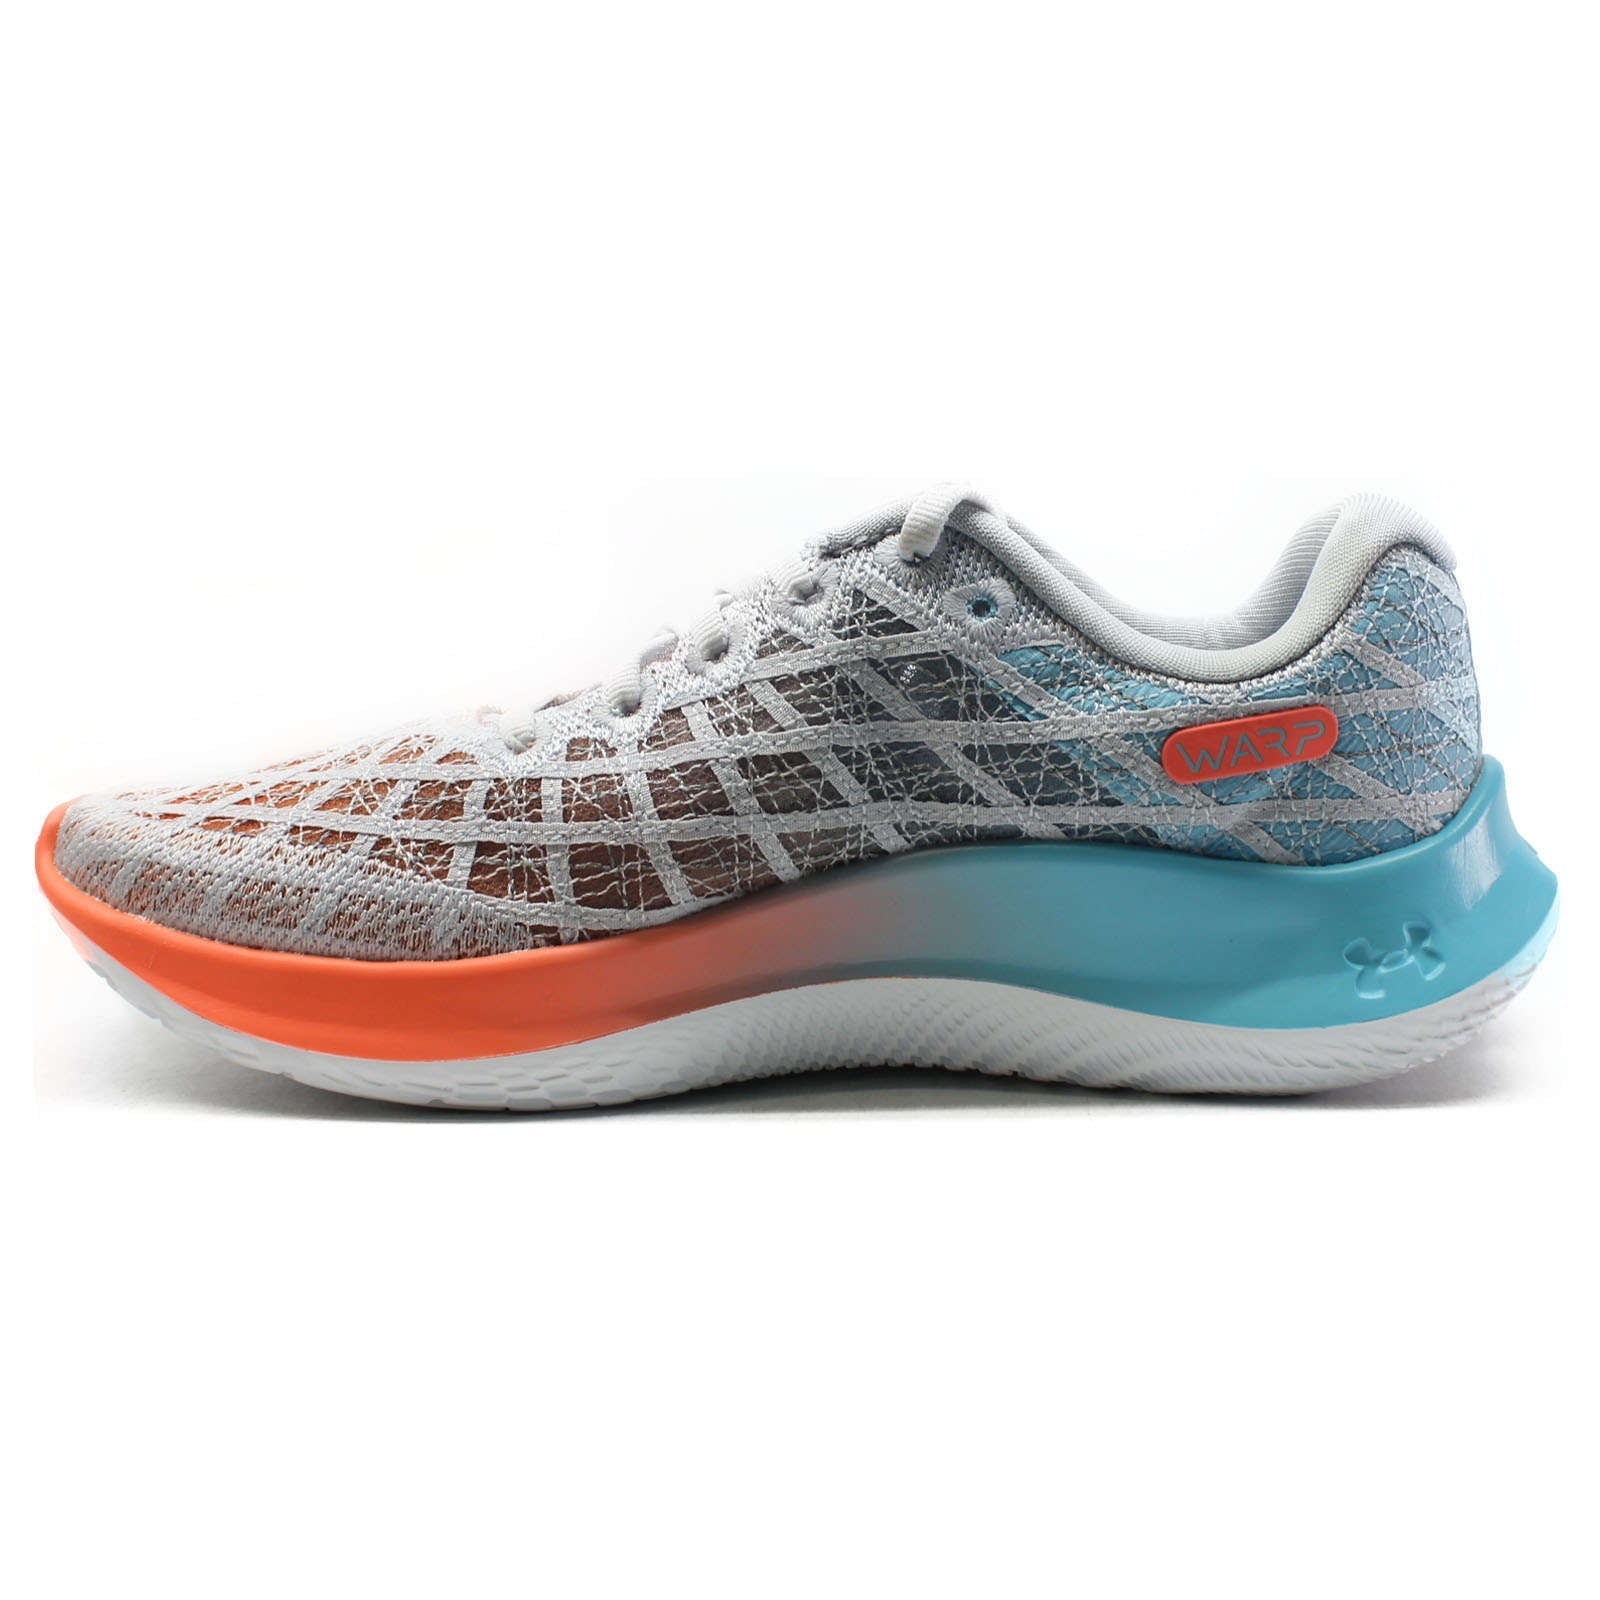 Under Armour Flow Velociti Wind 2 Synthetic Textile Women's Low-Top Sneakers#color_grey blue